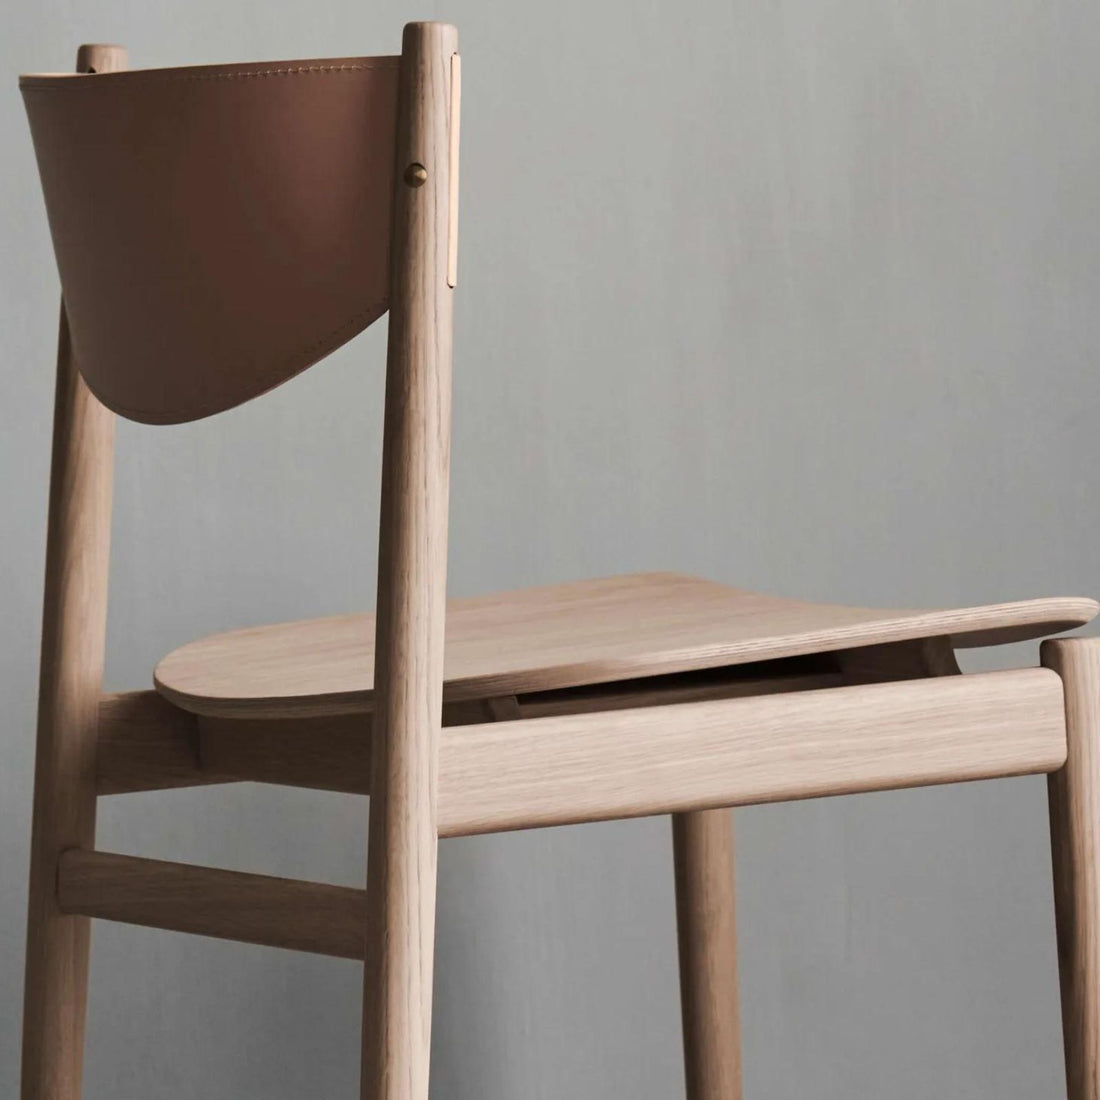 Apelle | Dining chair